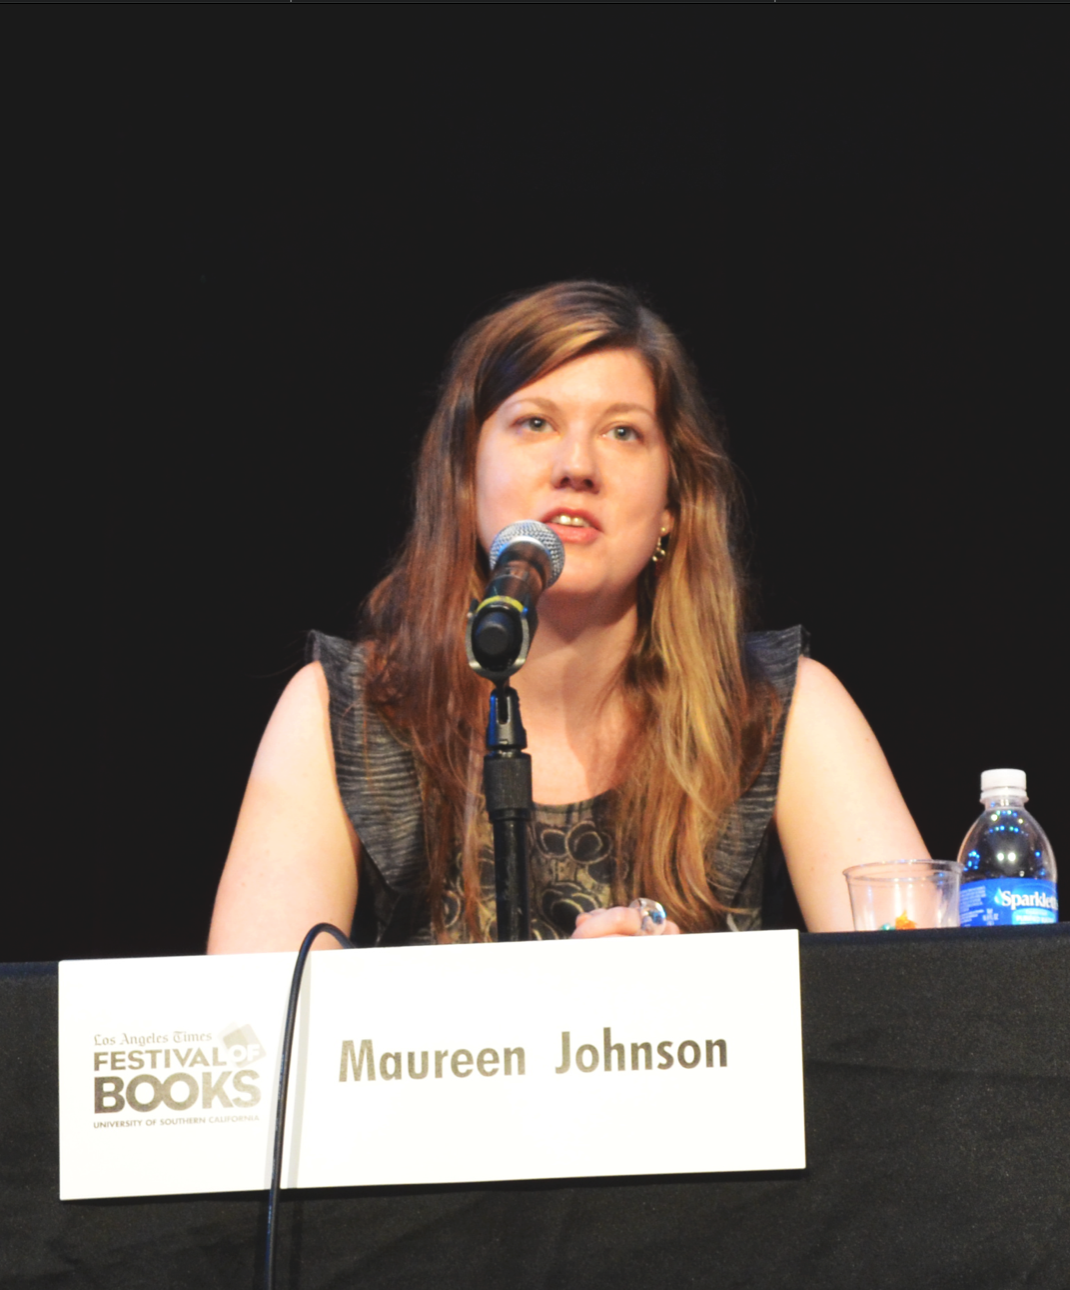 the name of the star by maureen johnson